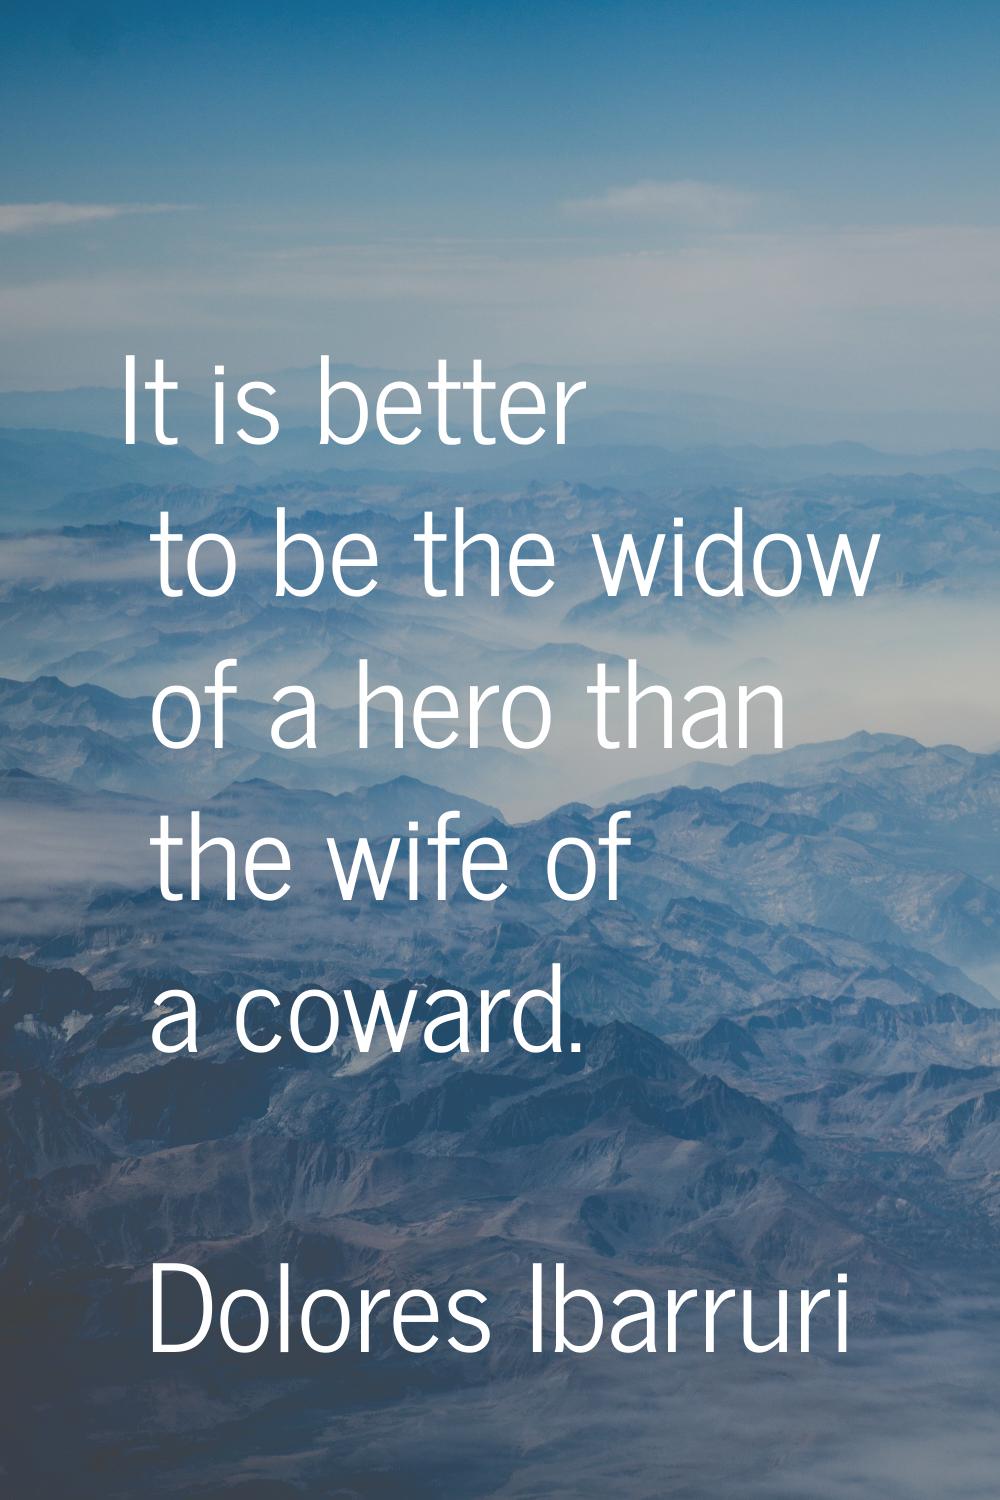 It is better to be the widow of a hero than the wife of a coward.